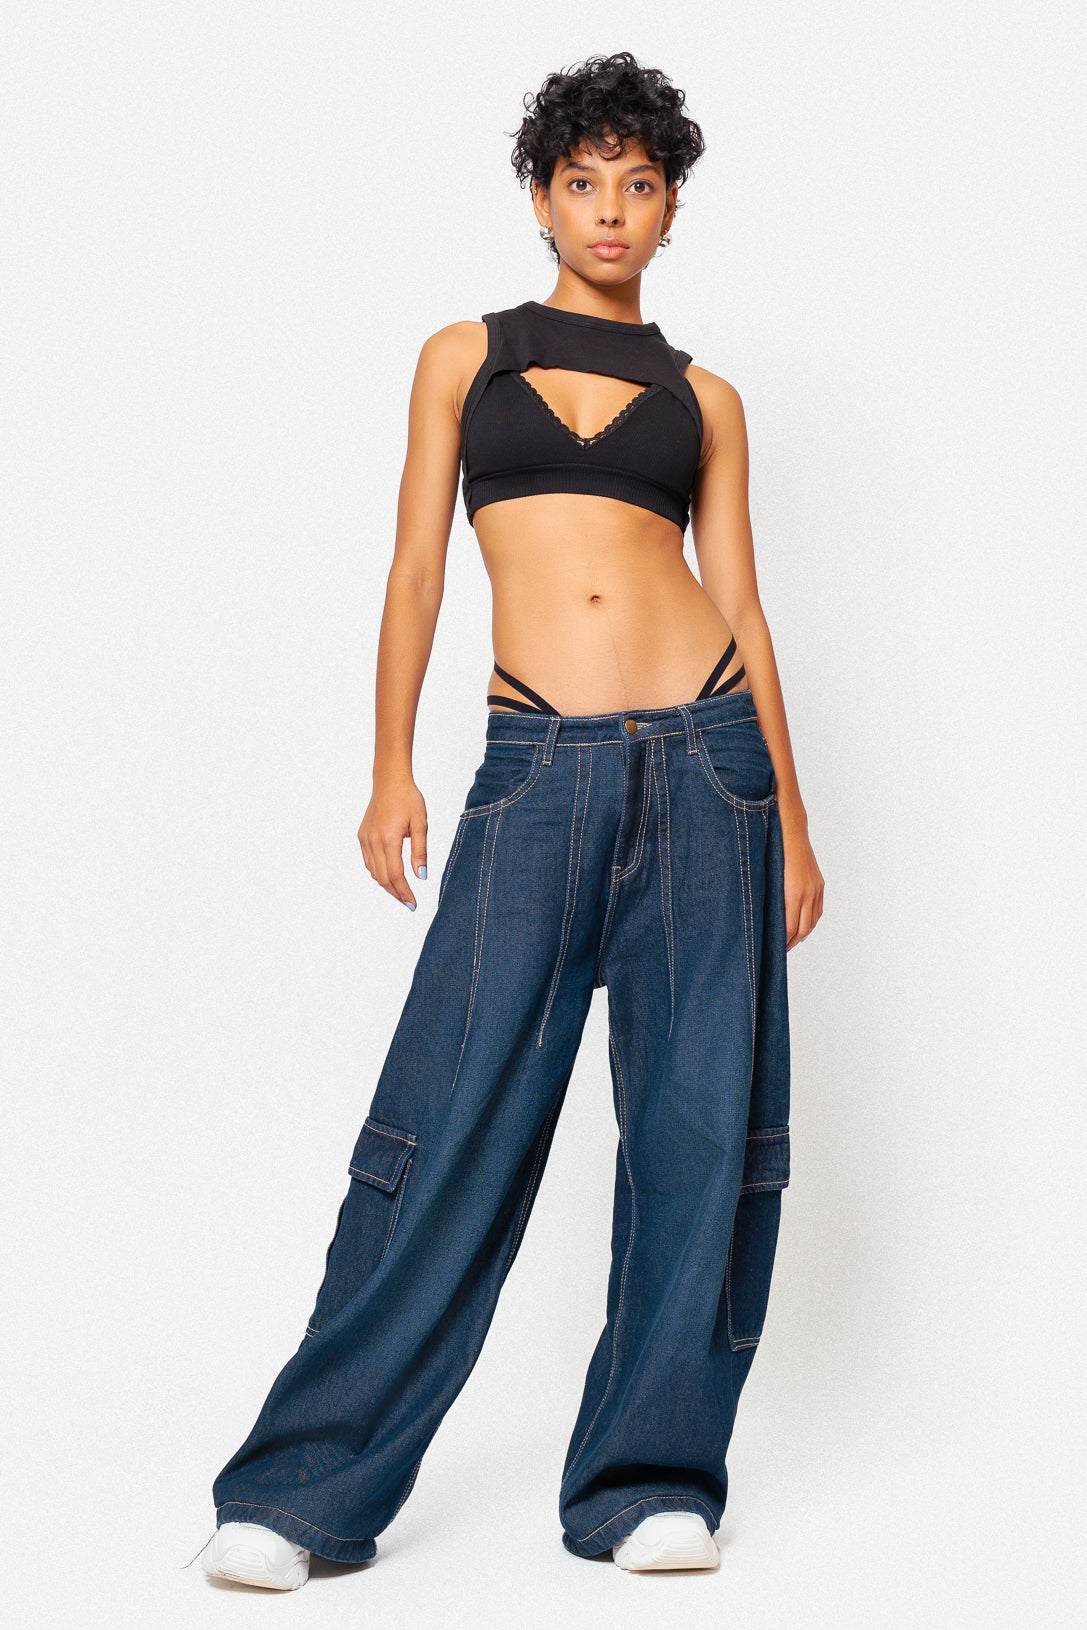 Shop for Baggy Jeans for Women Online Starting  999